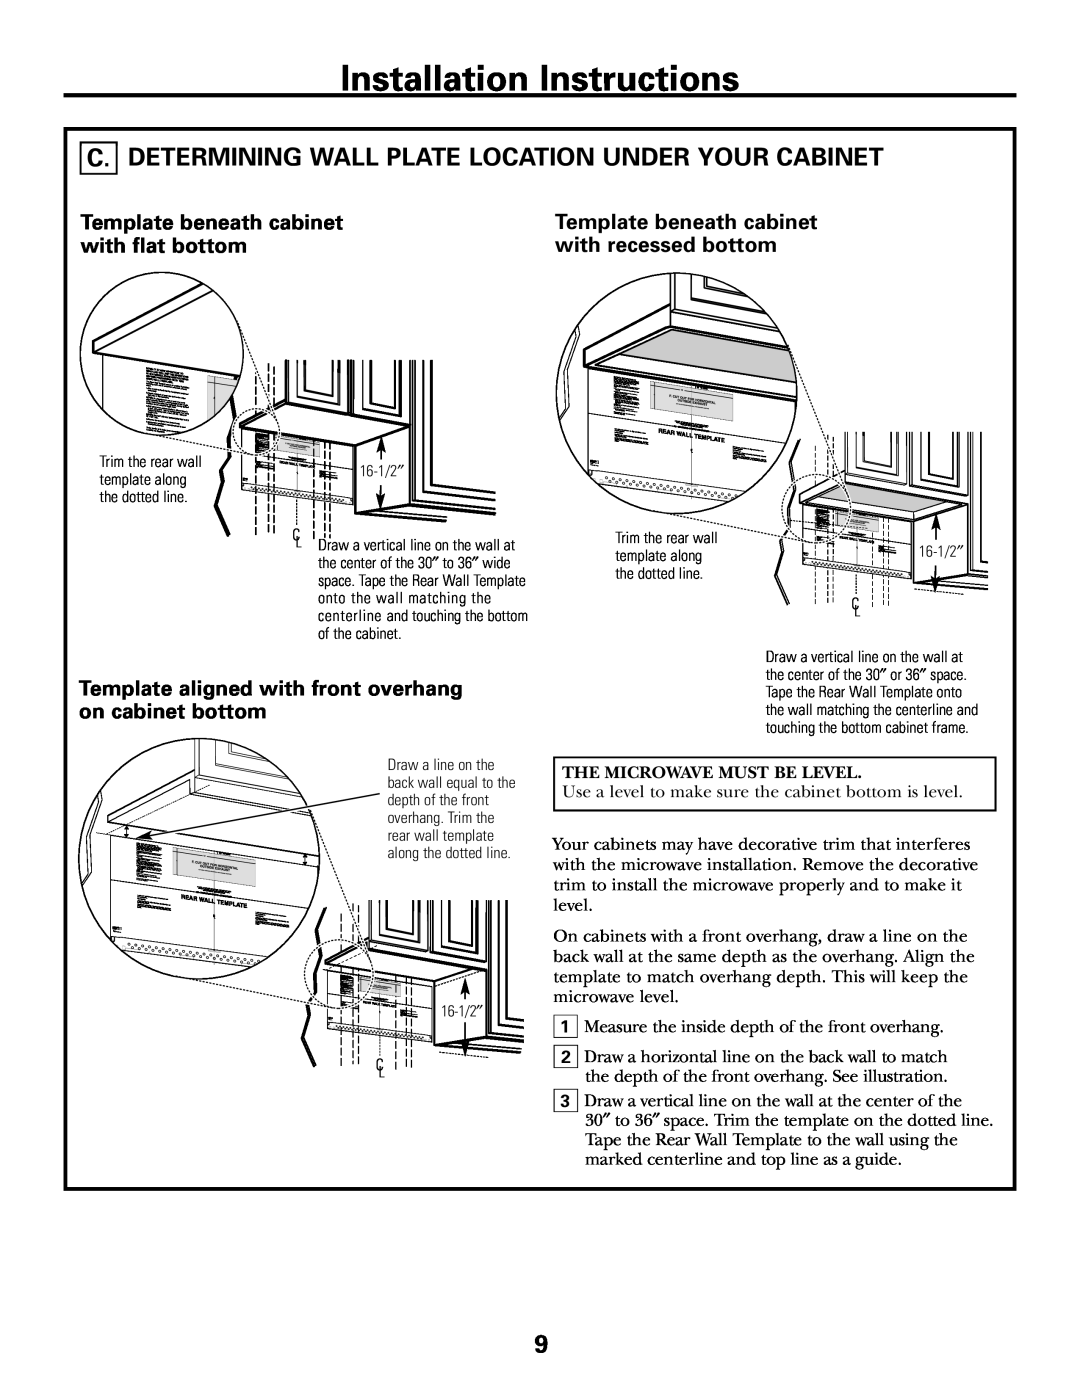 GE 39-40425, DE68-02957A Installation Instructions, Template beneath cabinet, with flat bottom, with recessed bottom 